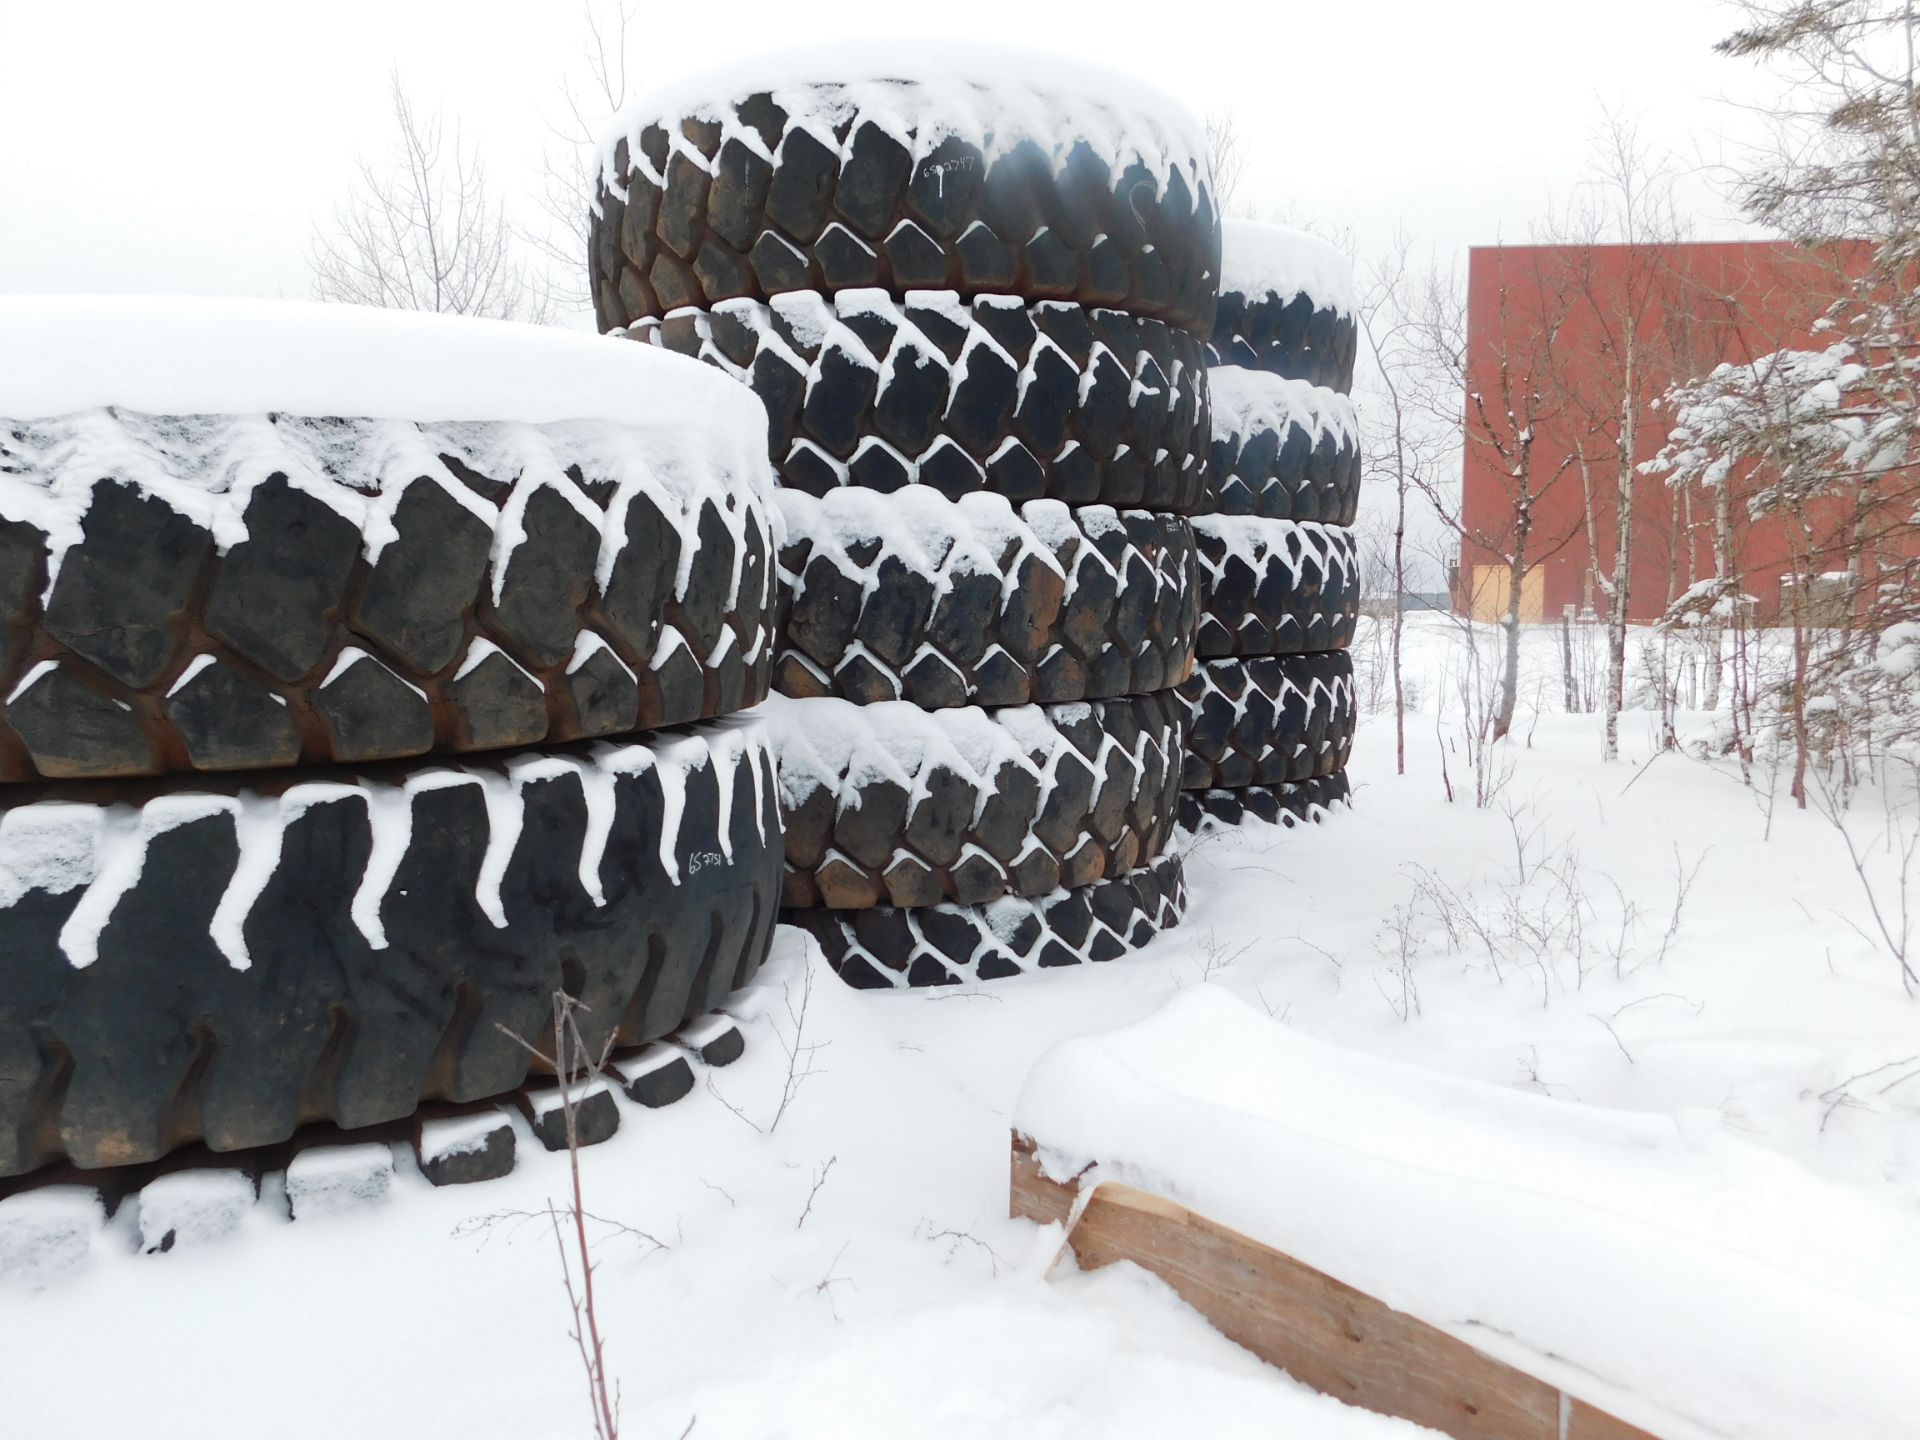 Truck tires for articulating rock truck - Image 3 of 5